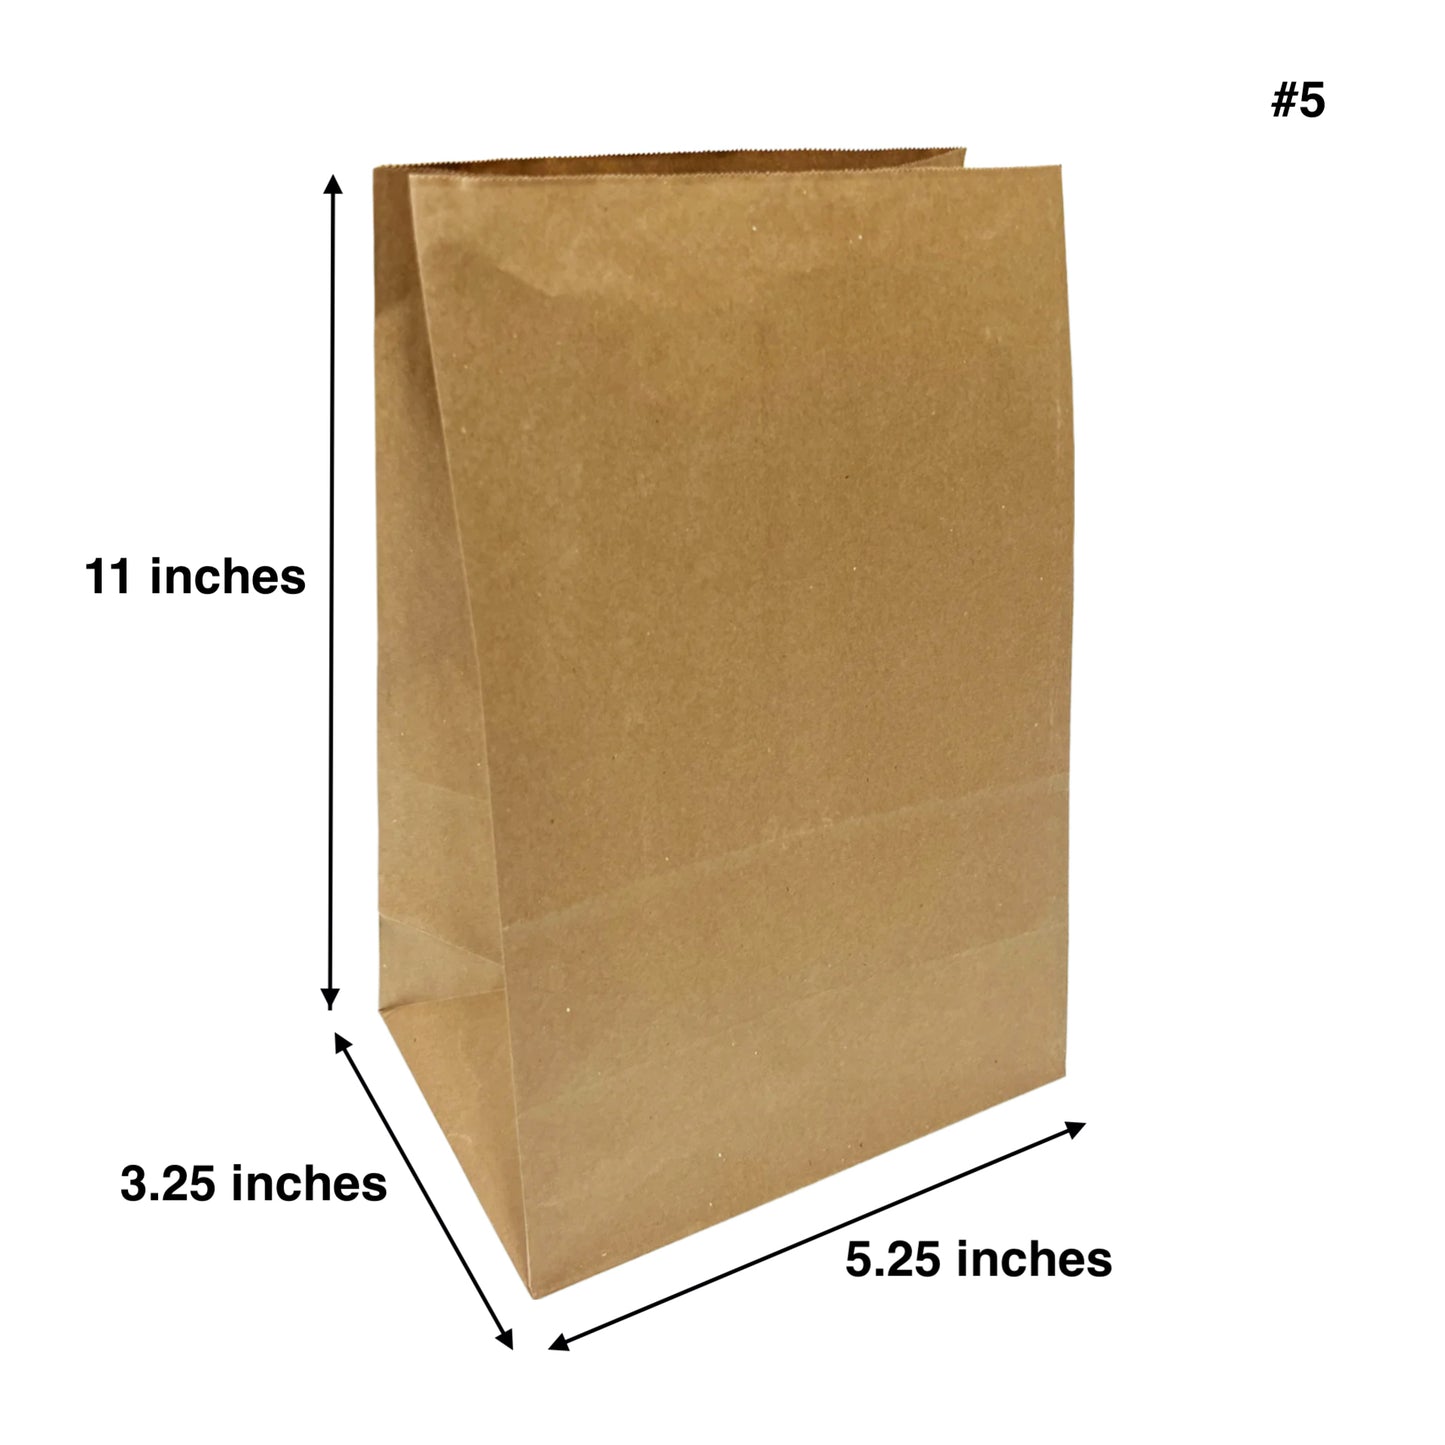 500pcs #5 Grocery Bags 5.25x3.25x11 inches; $0.04/pc